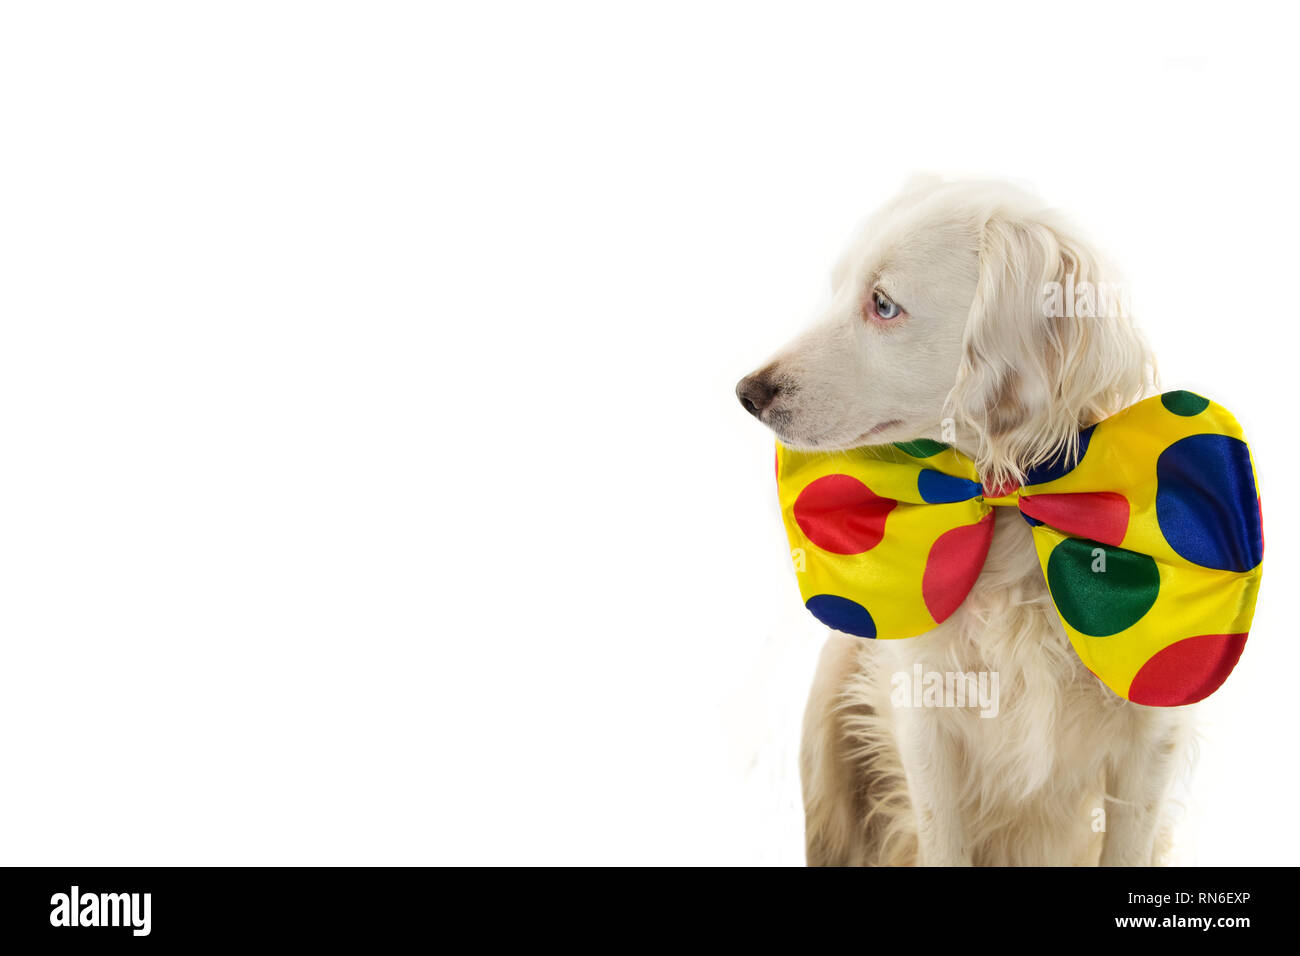 CUTE DOG DRESSED AS A CLOWN. CARNIVAL OR HALLOWEEN COSTUME. ISOLATED STUDIO SHOT ON WHITE BACKGROUND. Stock Photo